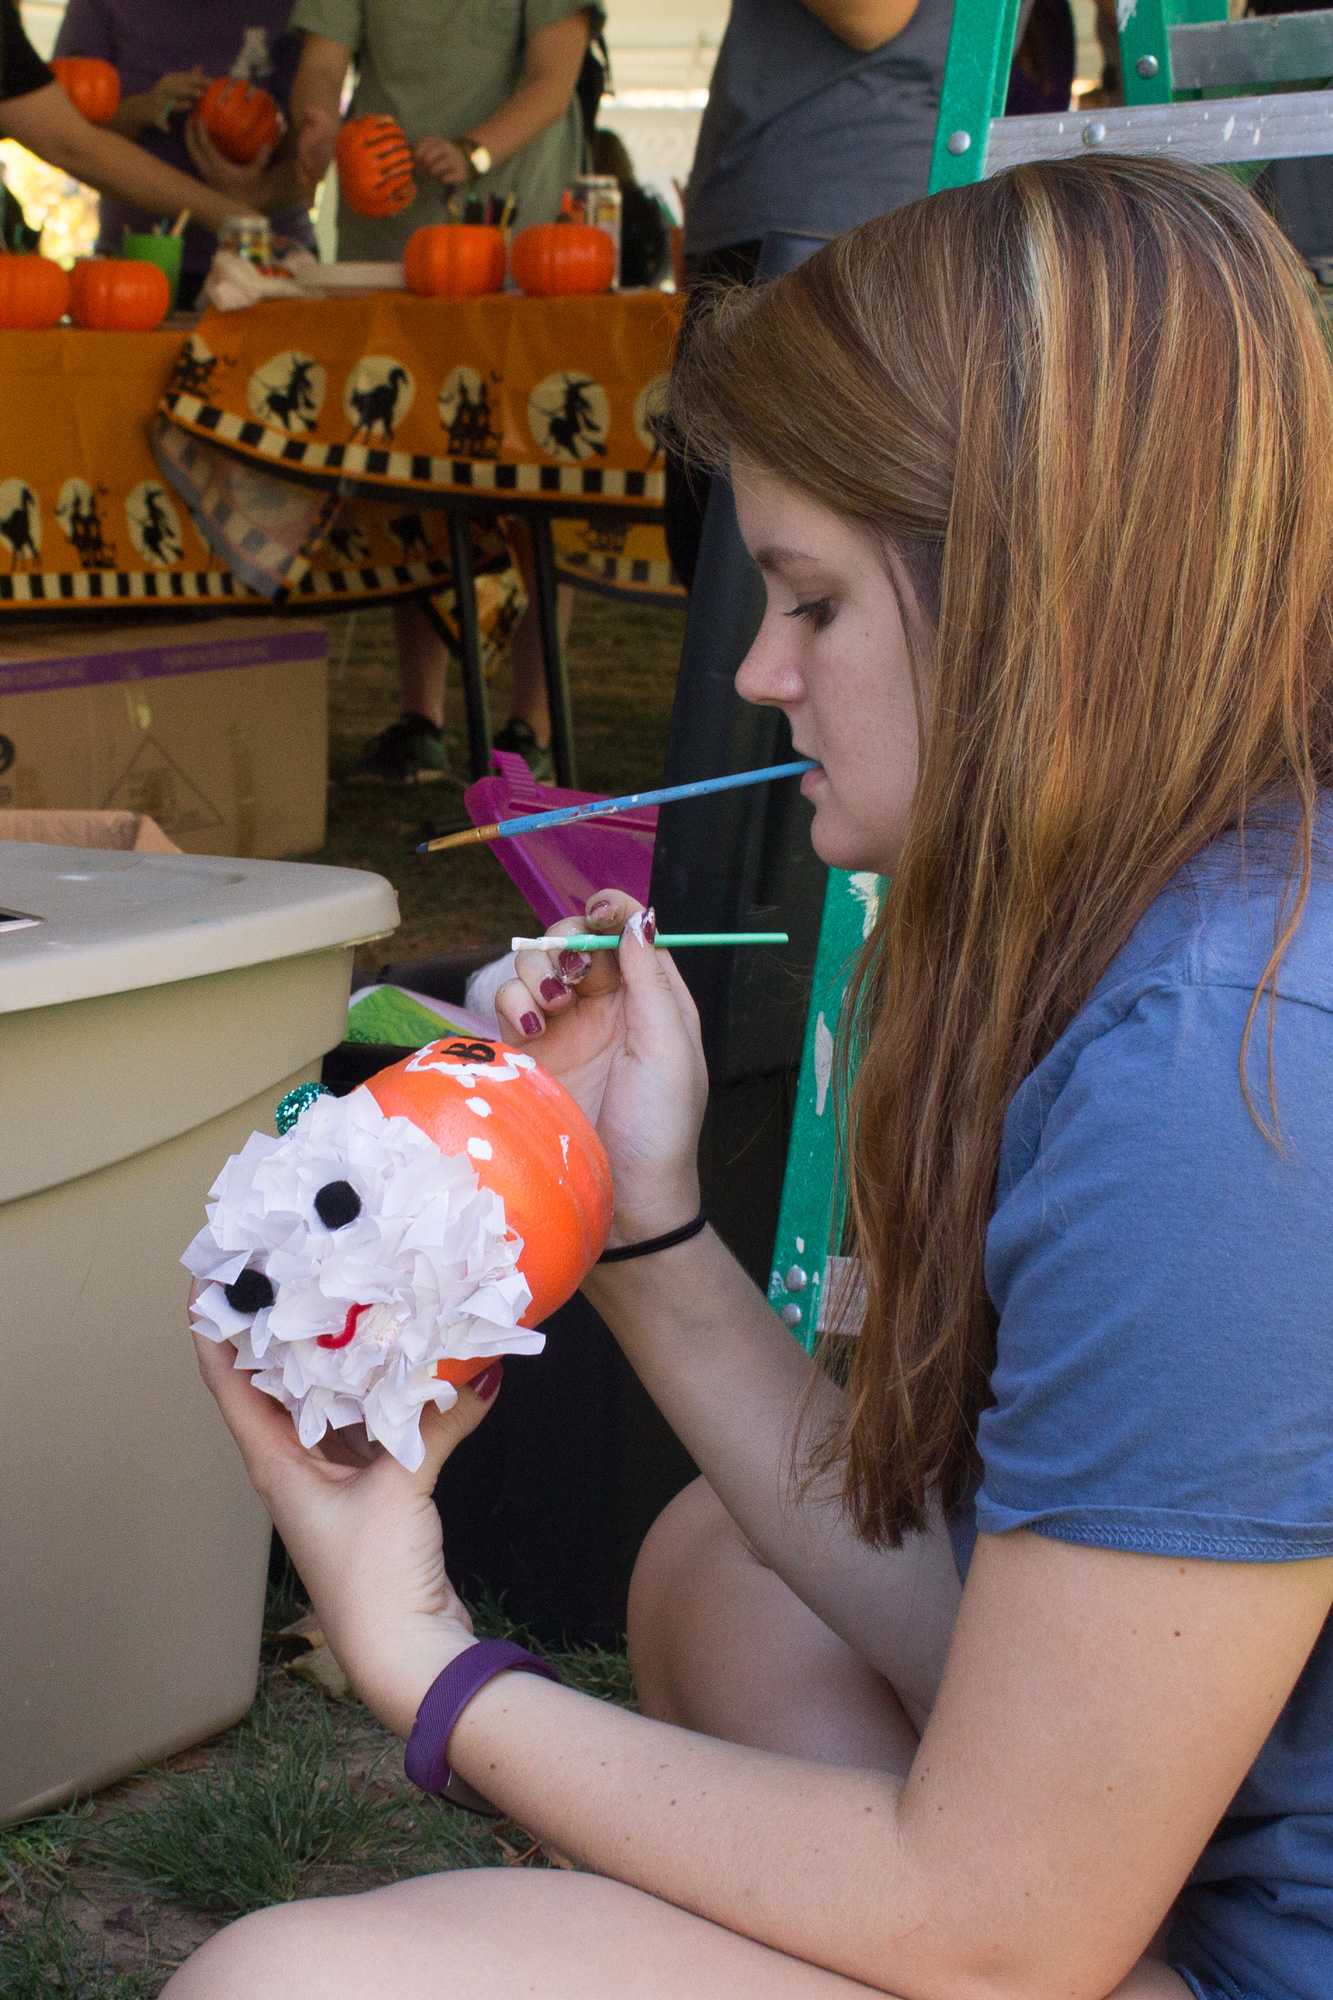 Junior management major and APPS executive officer Morgan Nystedt paints a pumpkin for Mountaineer Spirit Day on Oct. 19.